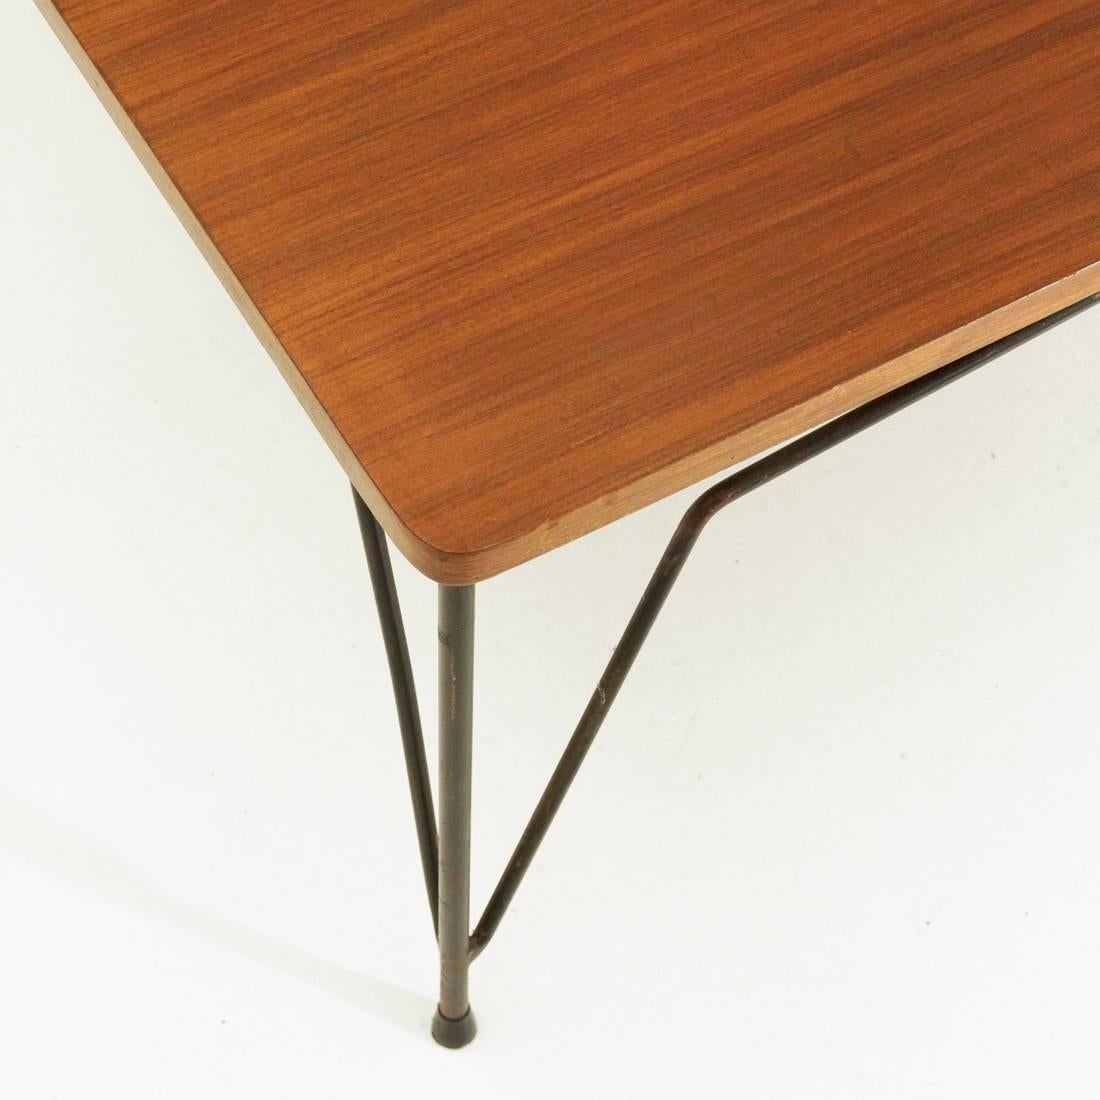 Metal Square Teak Coffee Table by Cerutti, 1950s